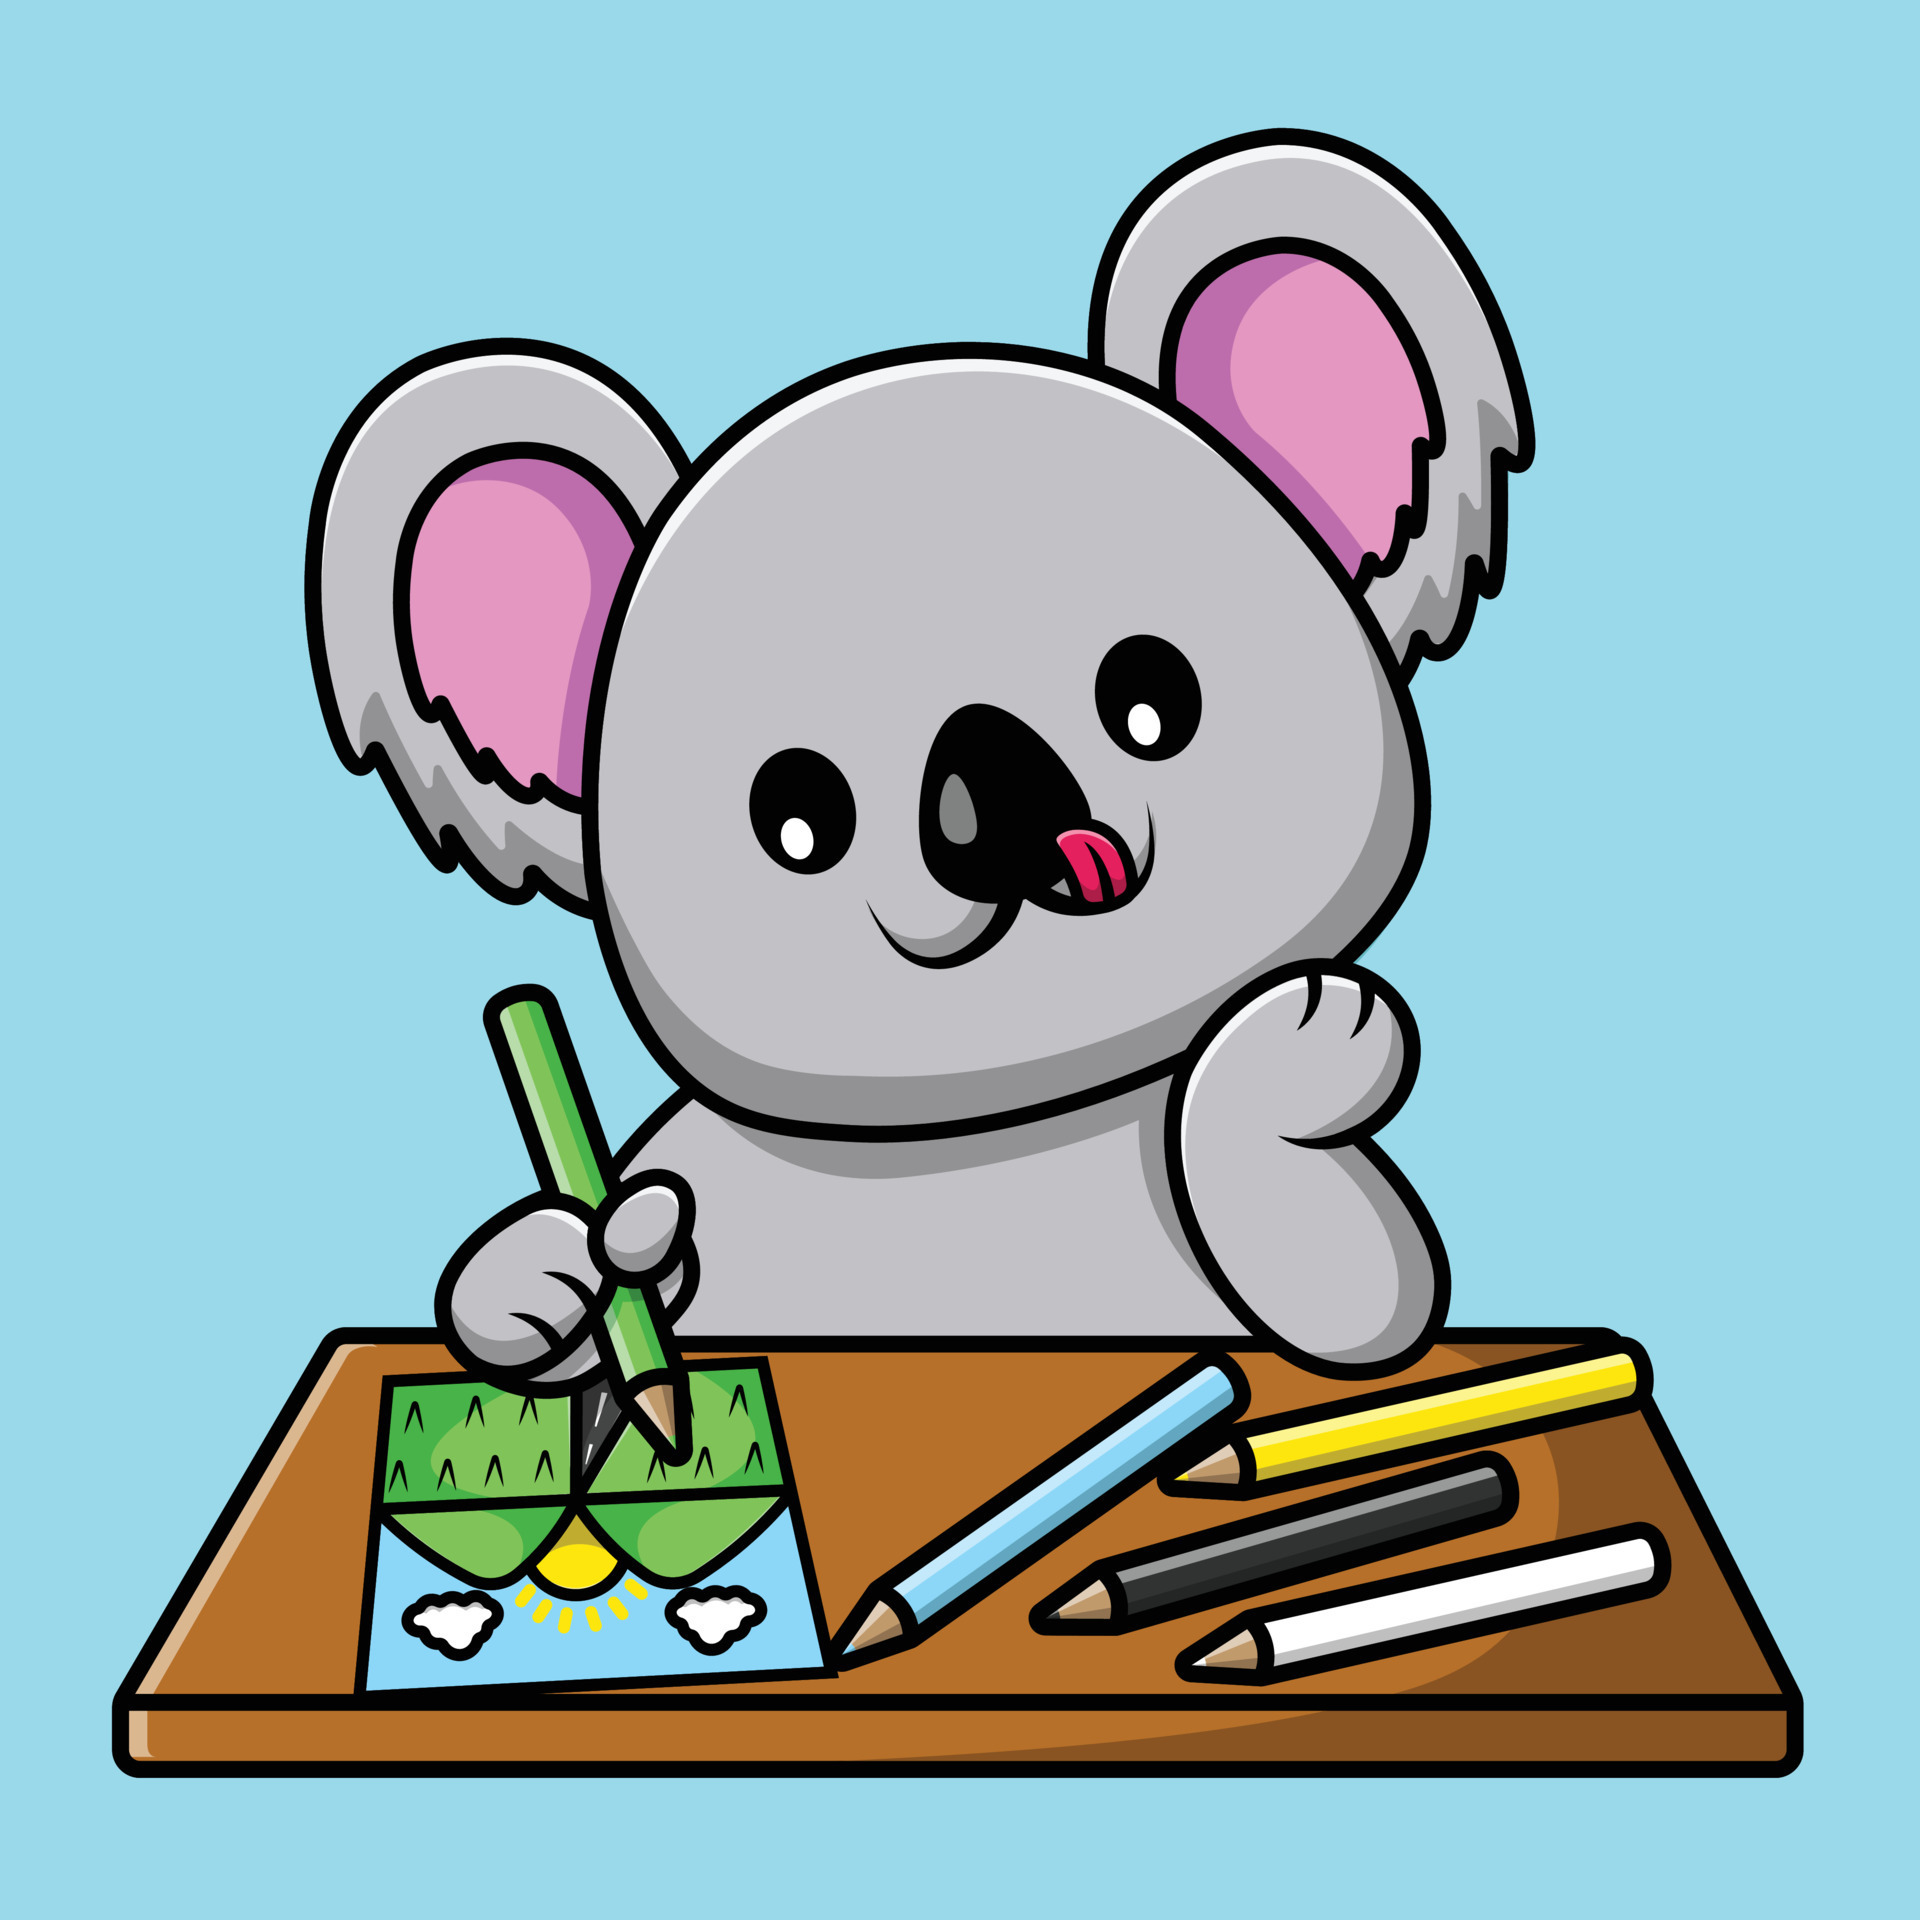 Cute Koala Drawing Mountain With Crayon And Paper On Table Cartoon ...